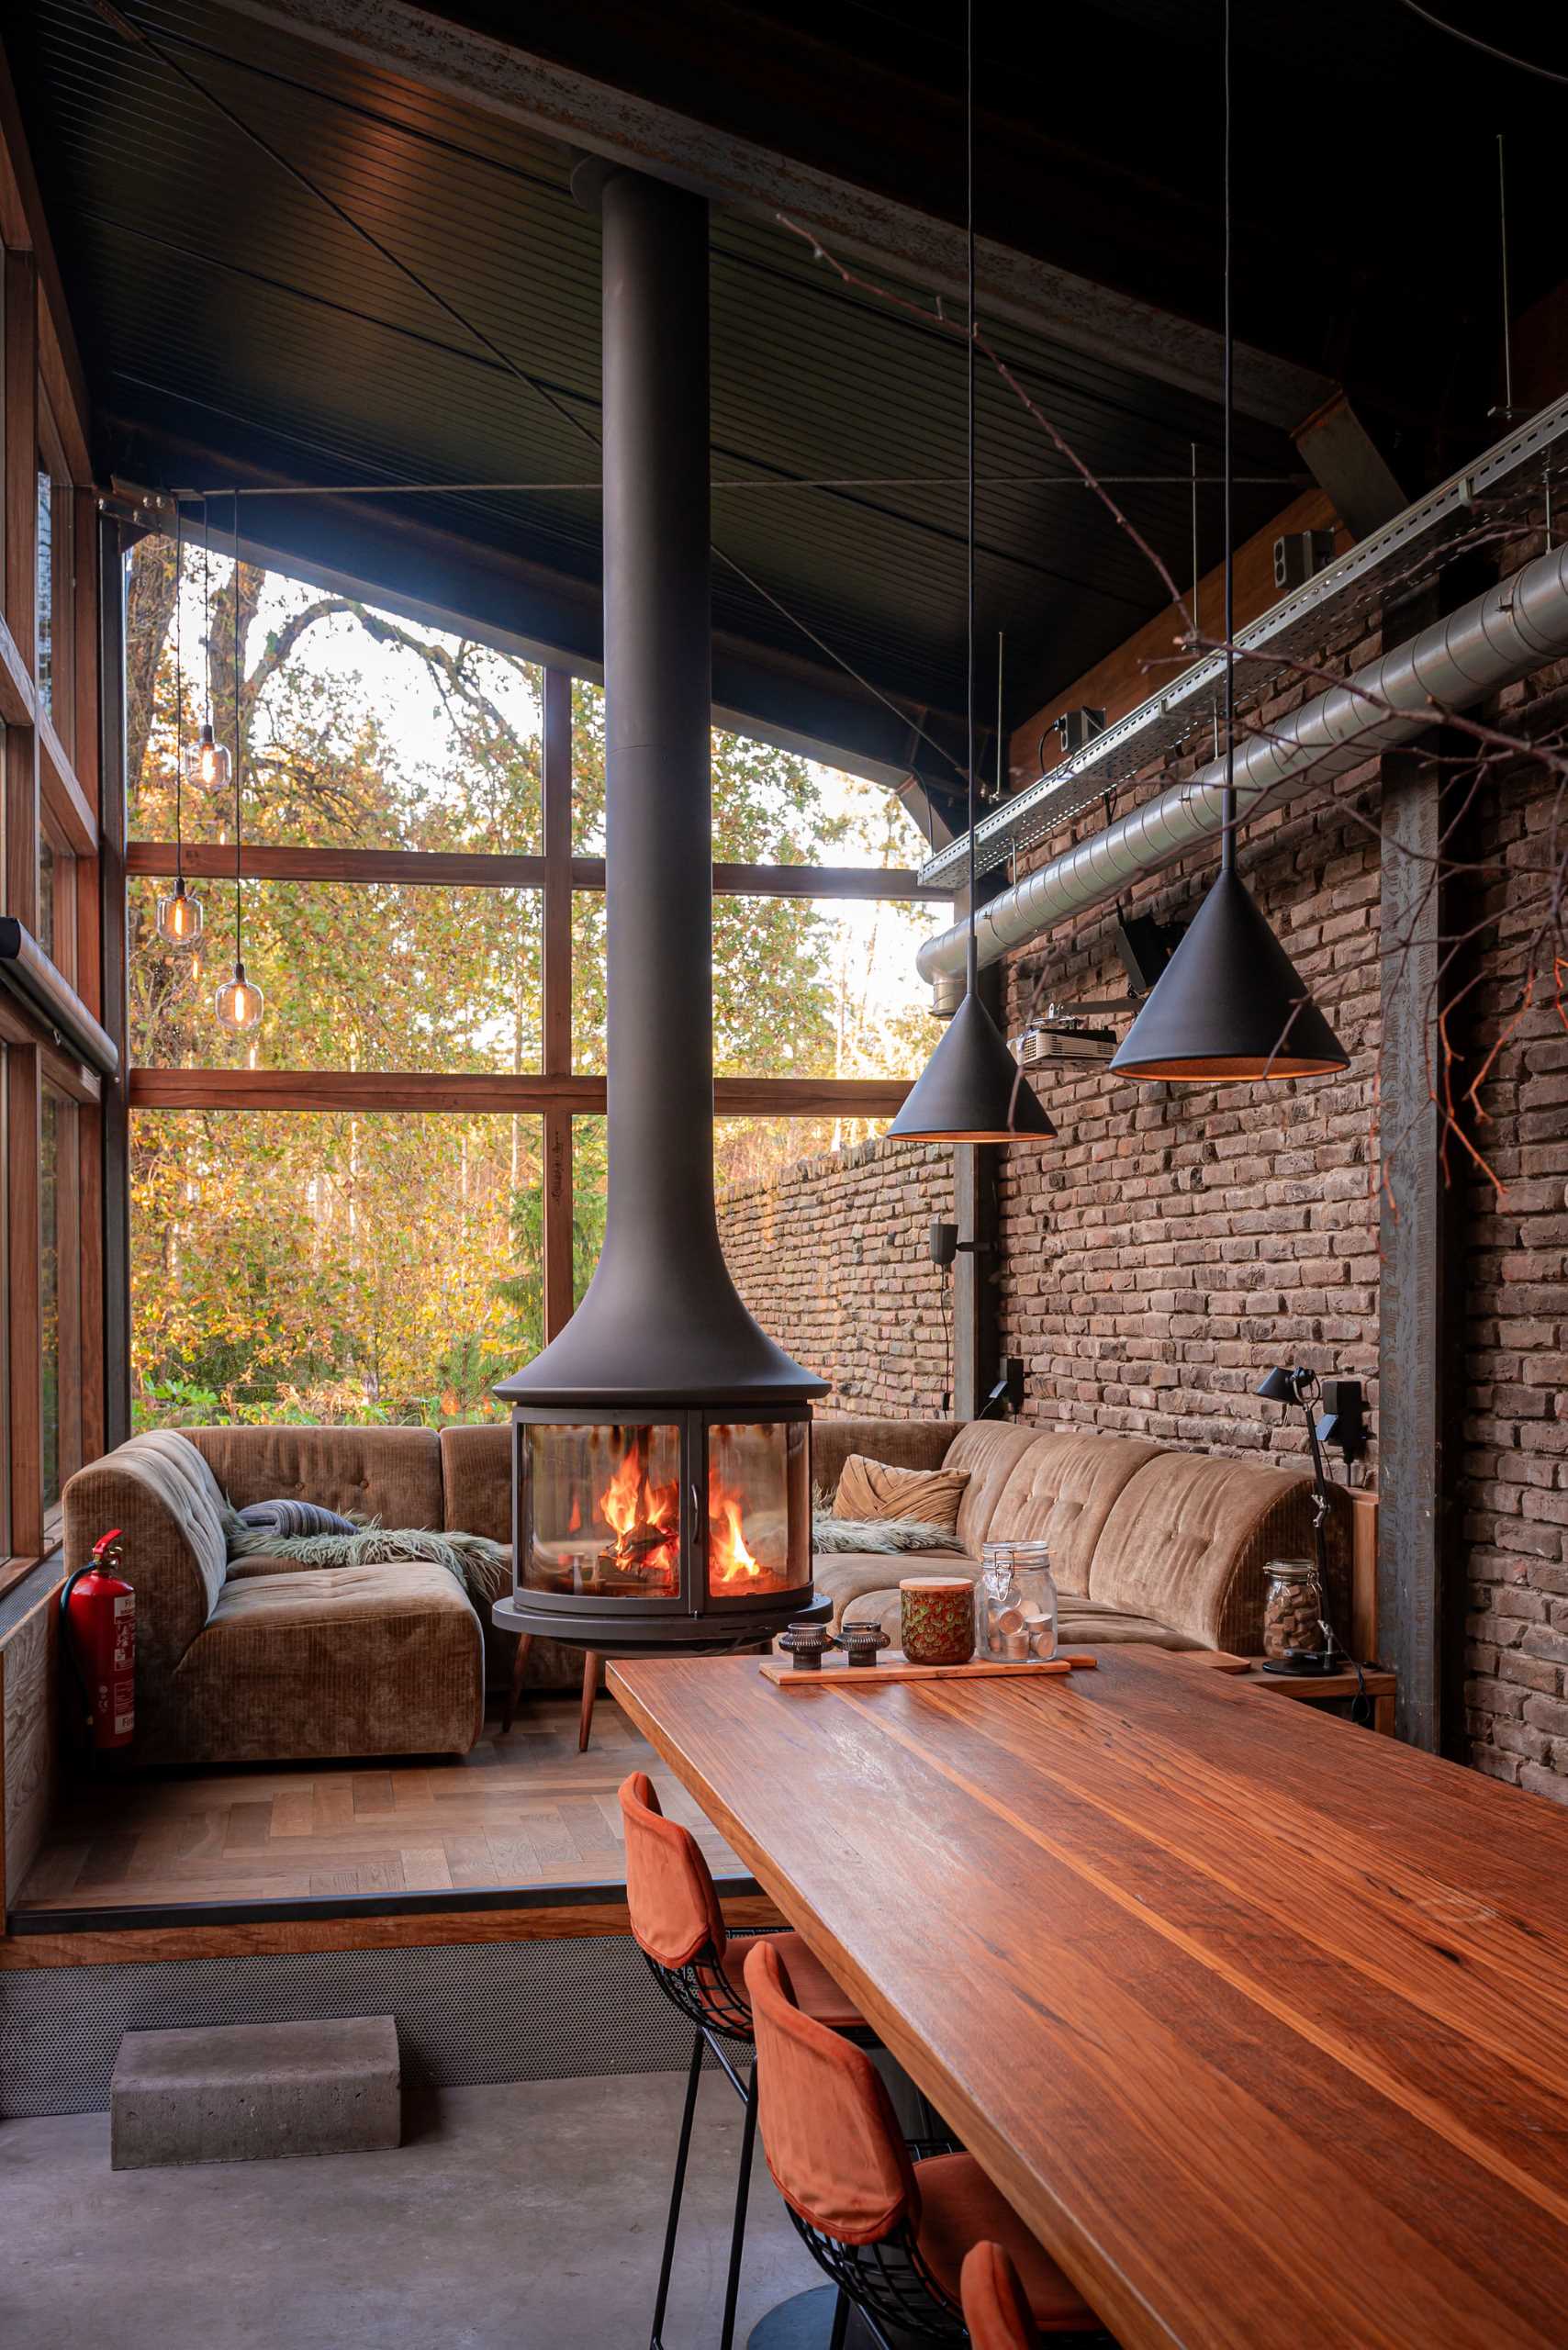 The walls featured on both the inside and outside of this home are made of ‘misfires’, or bricks that have transformed into unusual shapes during the baking process. 